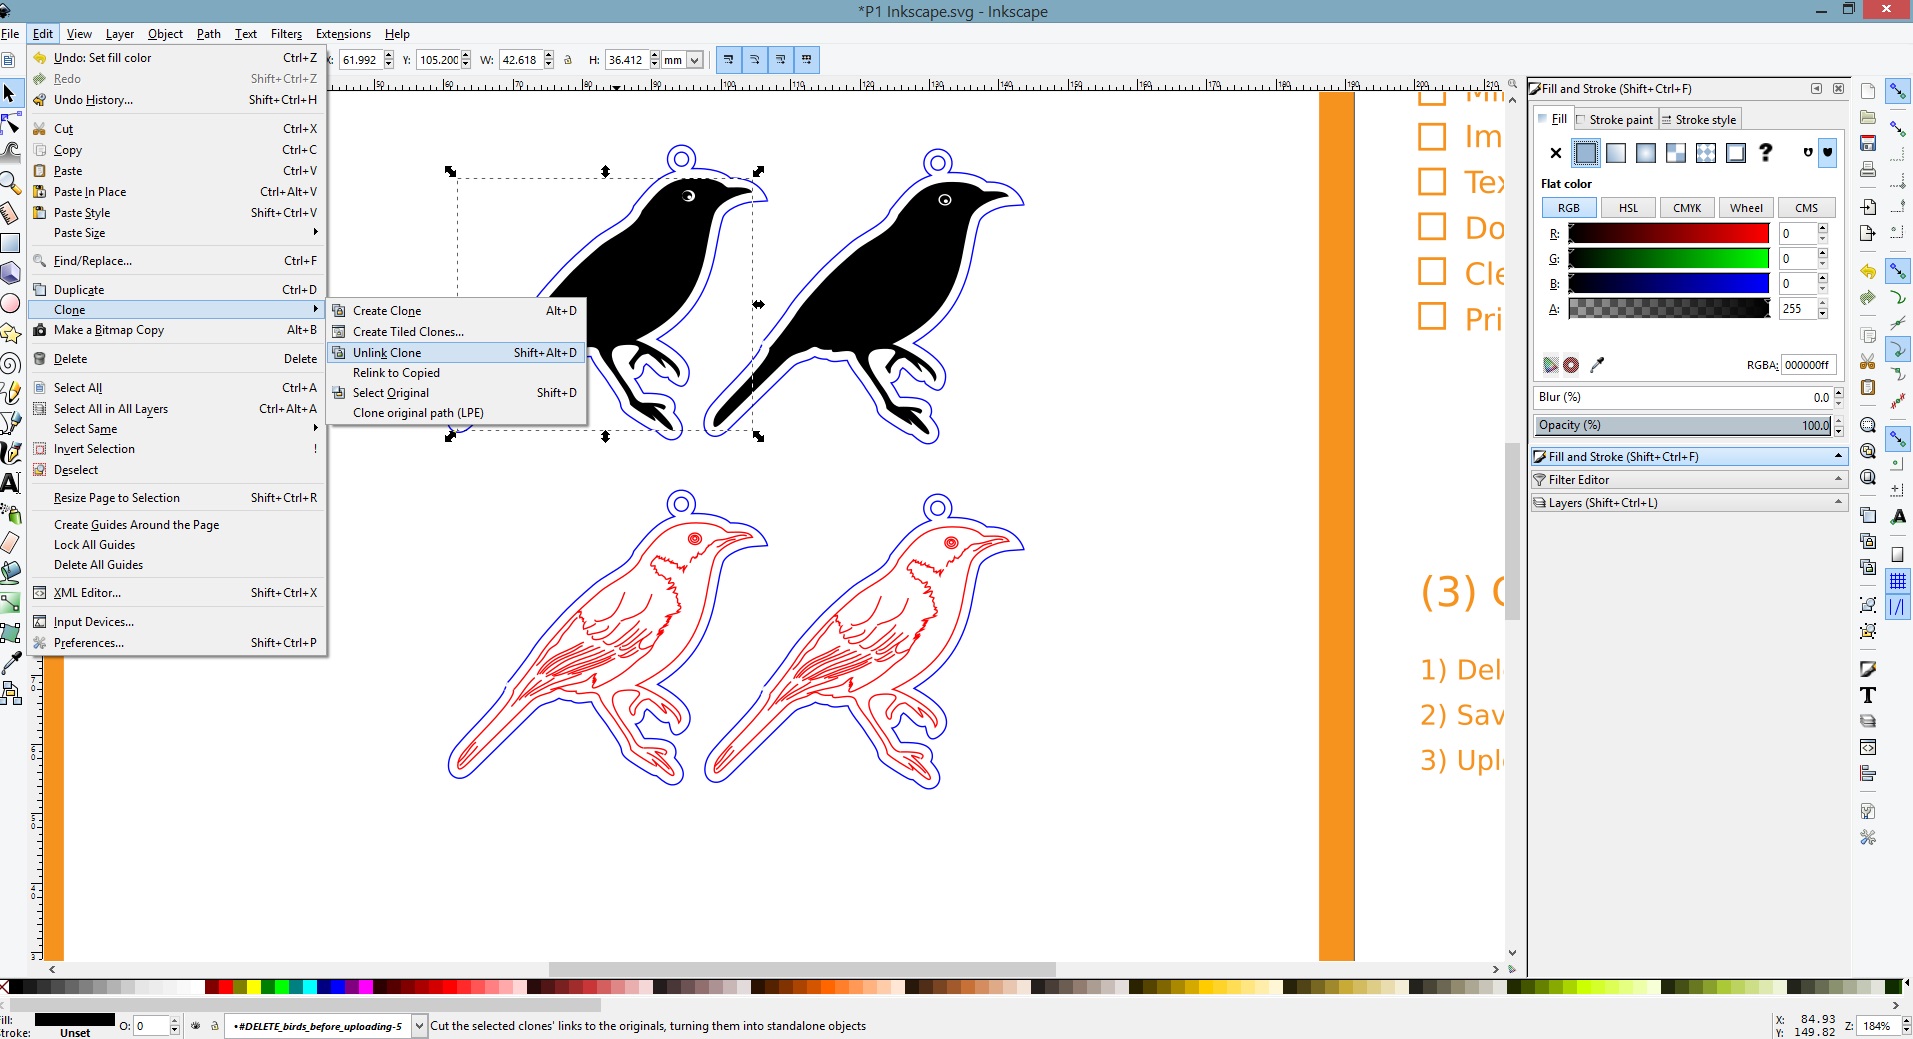 how to use inkscape to convert an image to vector